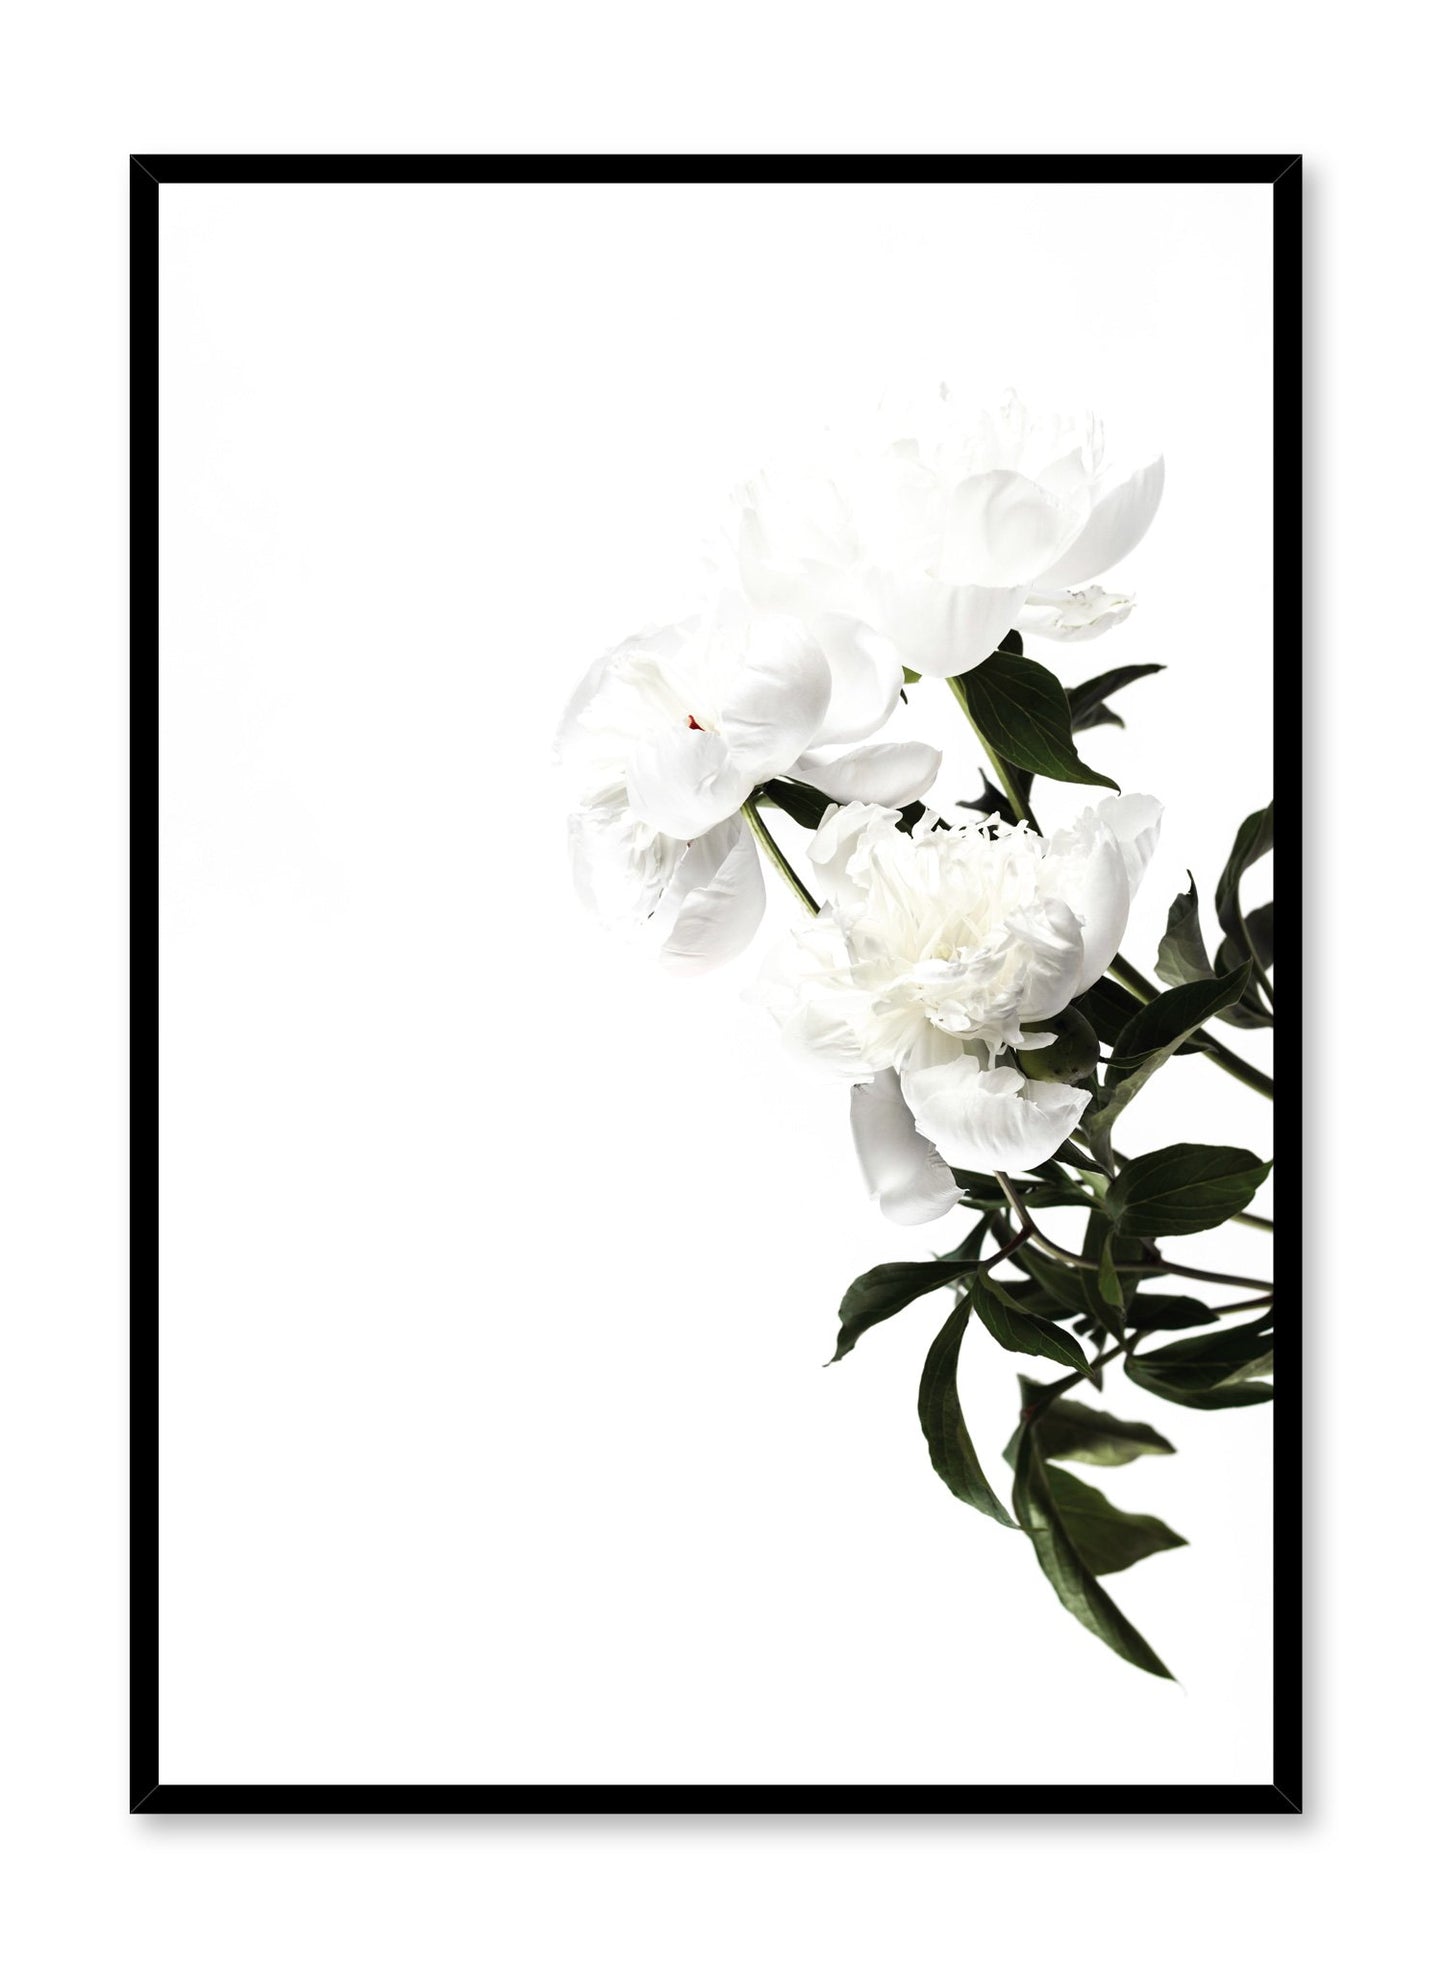 Minimalist art Daylight poster by Opposite Wall with botanical photography